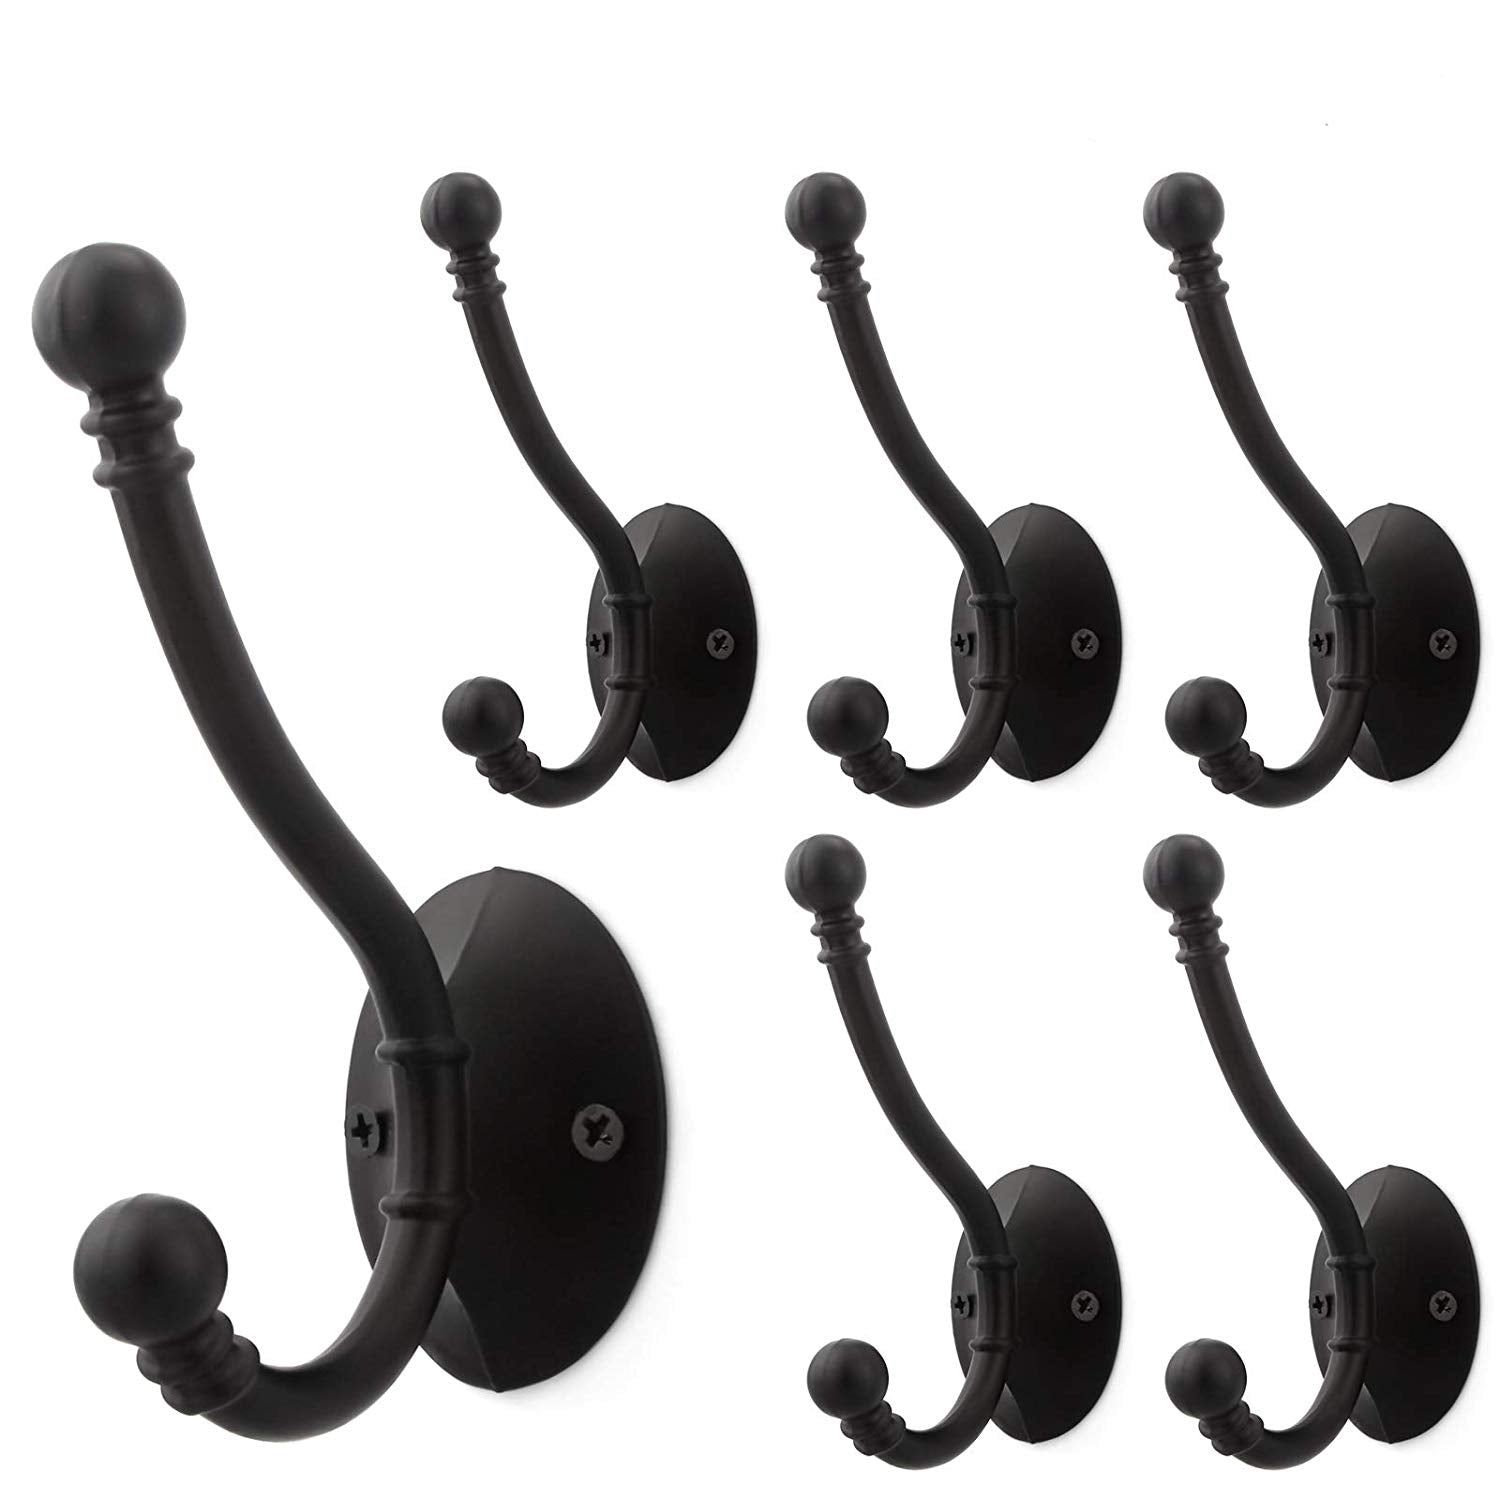 6 PCS 3-3/4 Inch Double Prong Coat and Hat Hook Heavy Duty Metal Wall Hangers with Ball Ends (Screws included), Flat Black